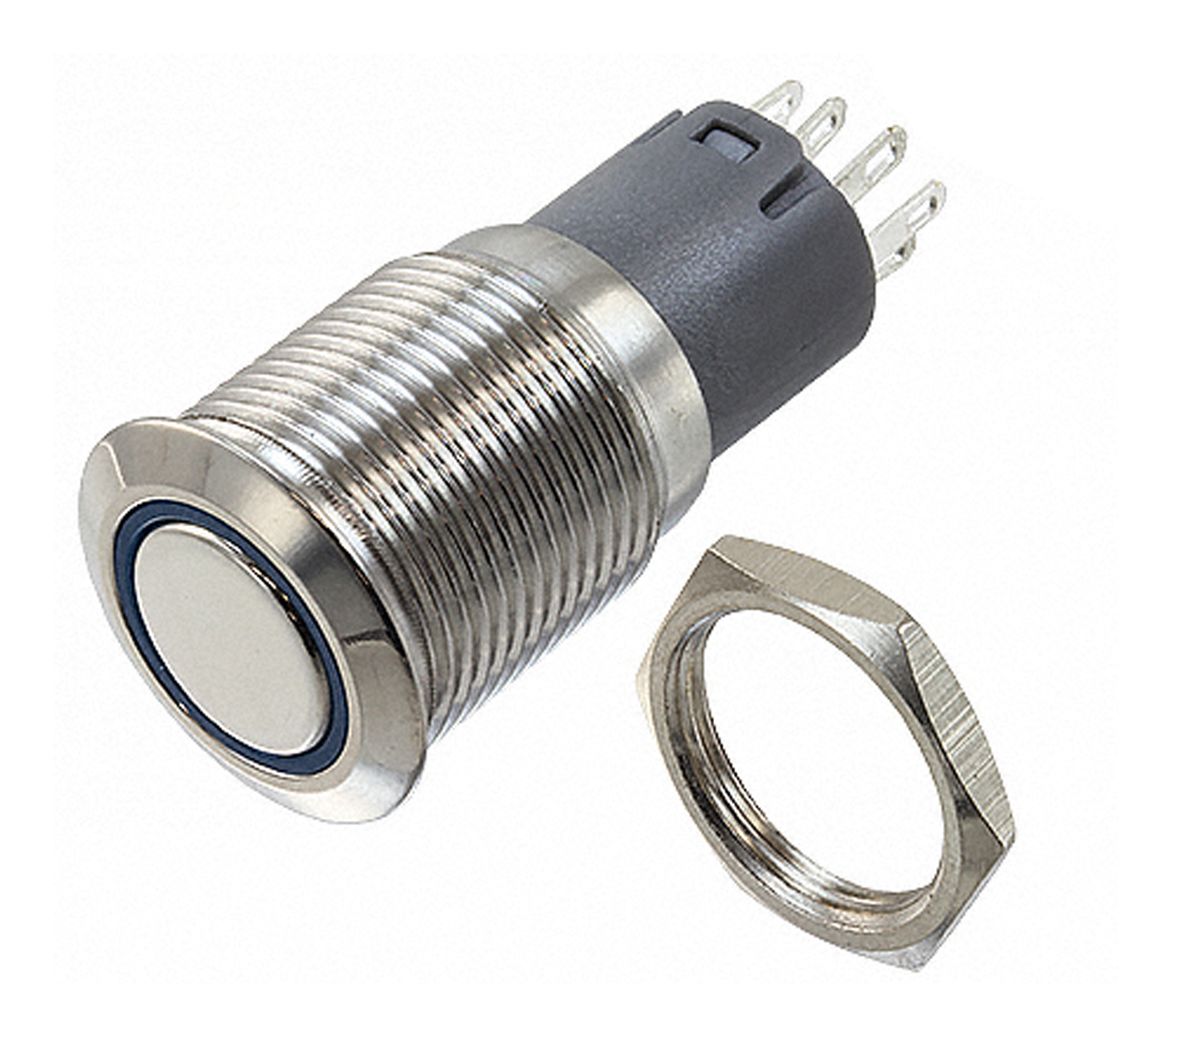 Illuminated Solder Push Button Switch, , 3 A, Double Pole Double Throw (DPDT), -20 → +55°C